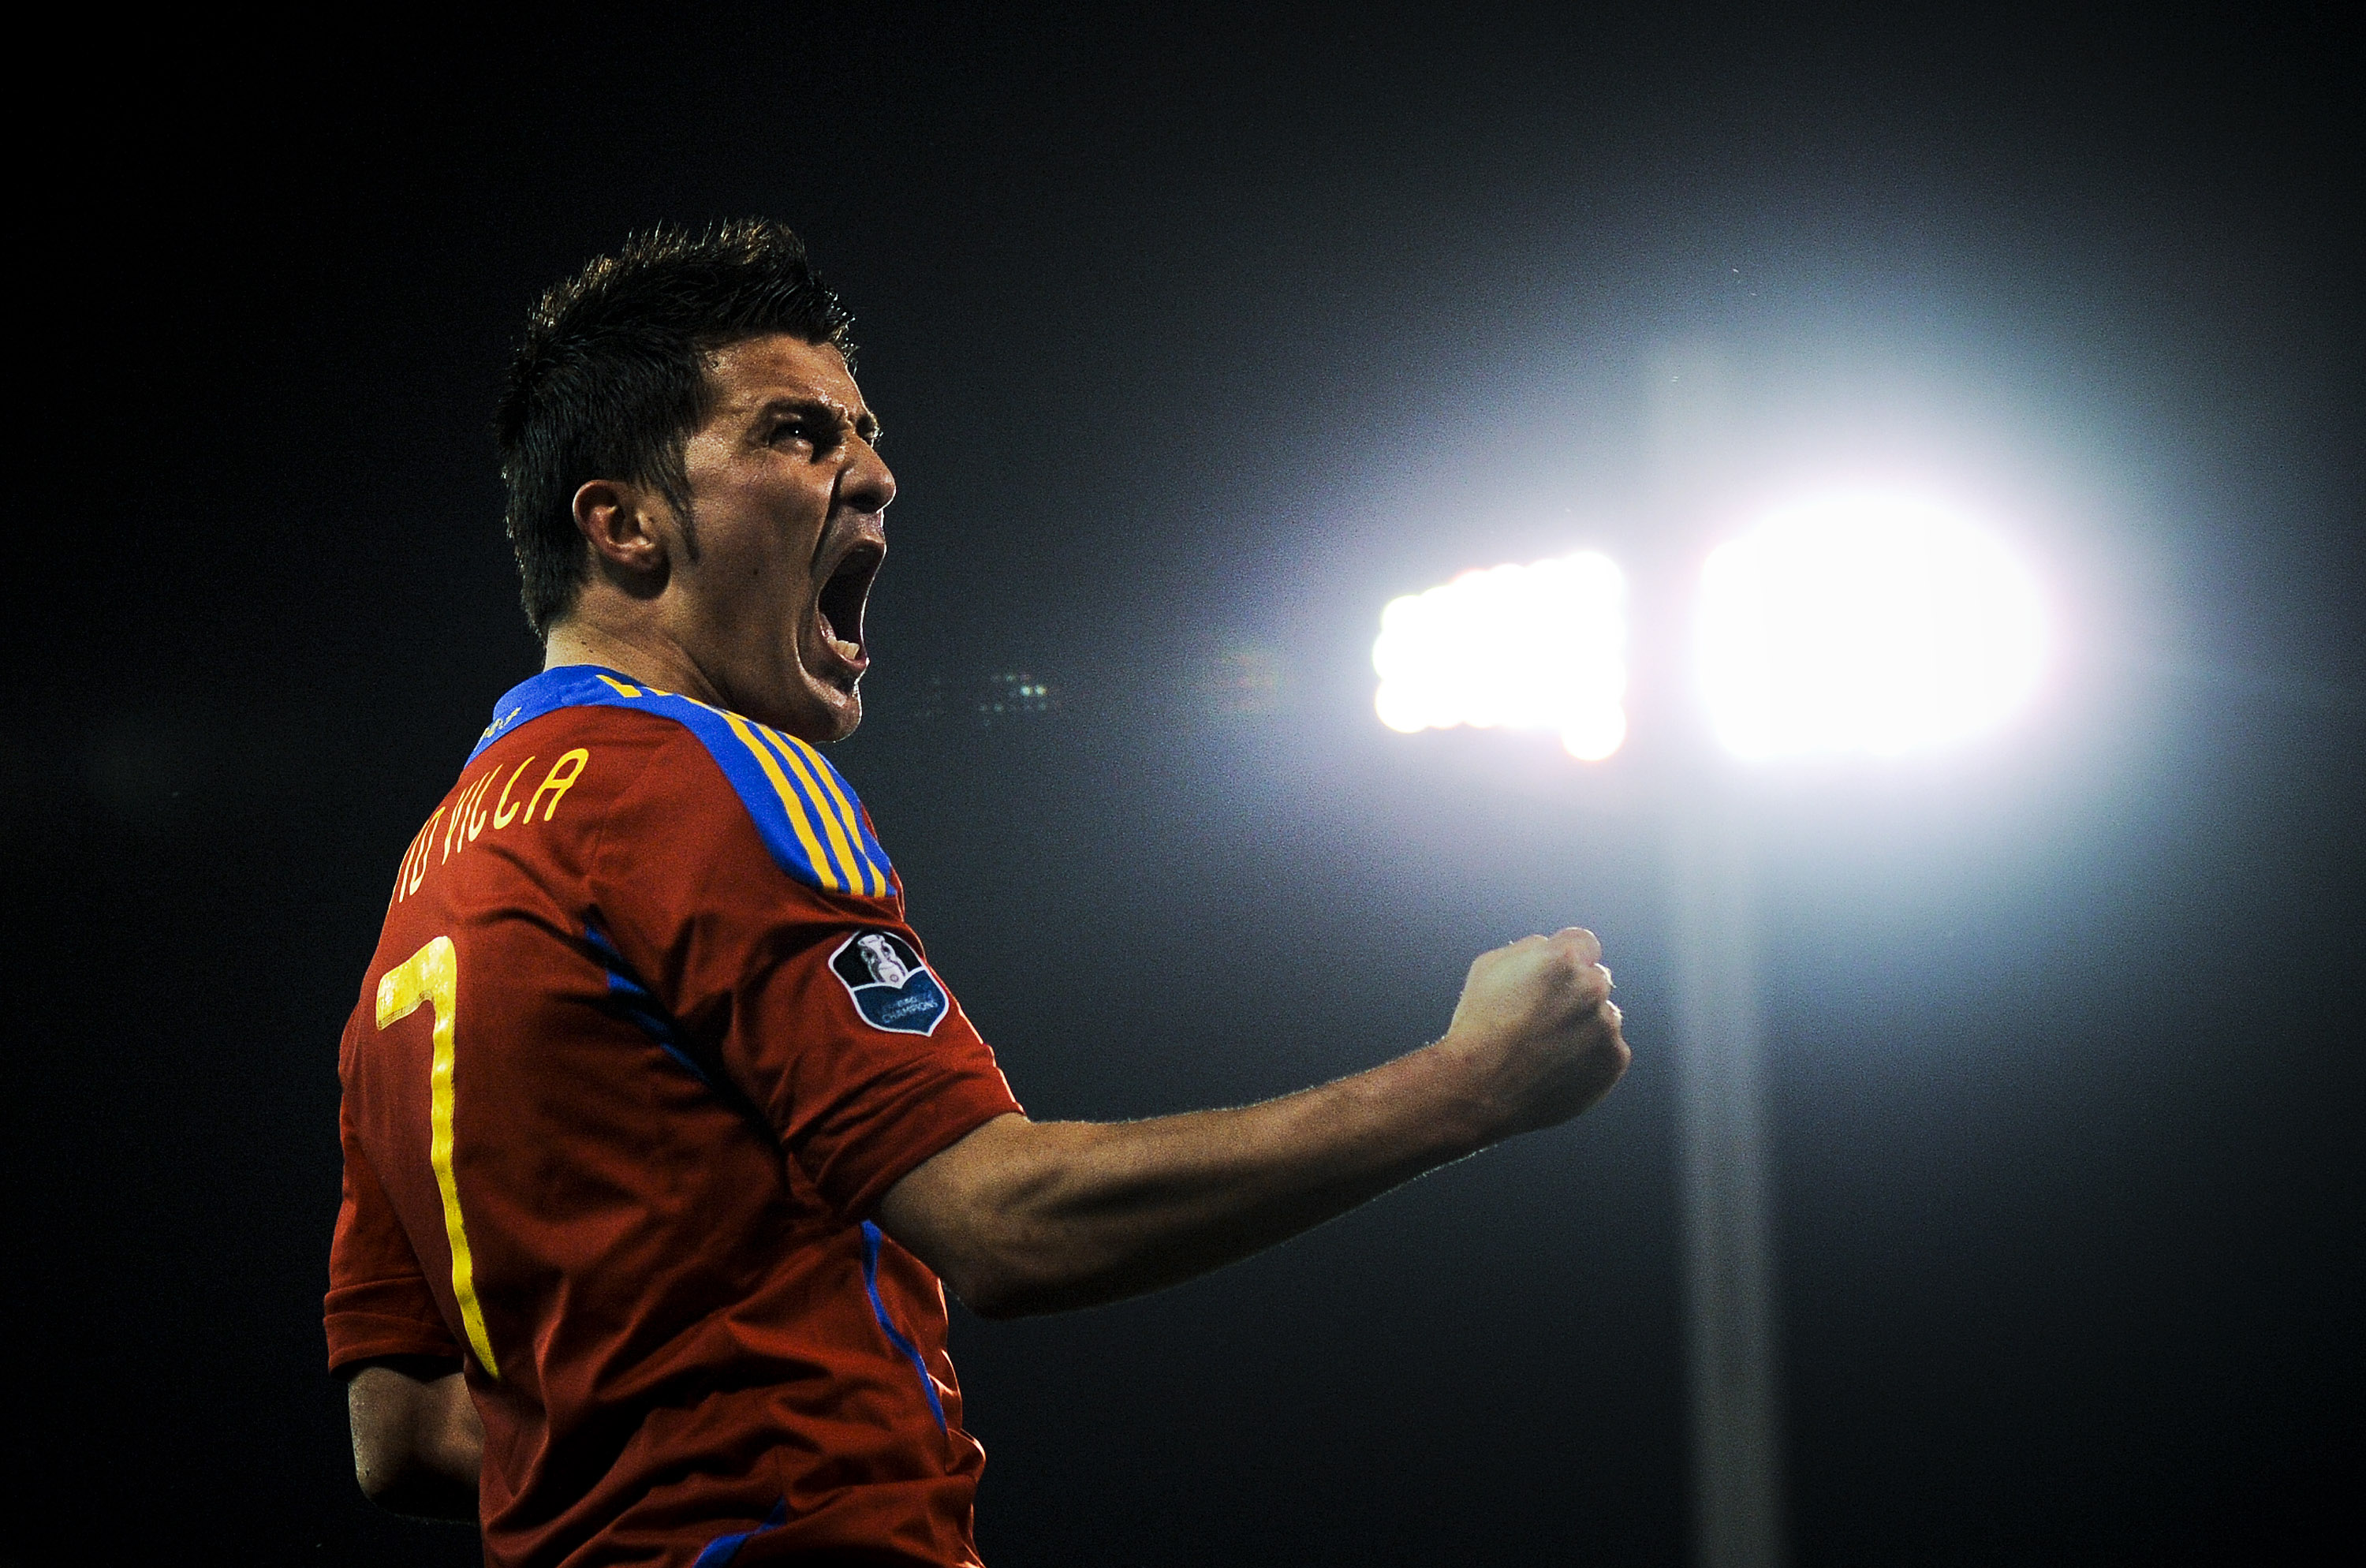 GRANADA, SPAIN - MARCH 25:  David Villa of Spain (R) celebrates after scoring his second goal during the UEFA EURO 2012 qualifier between Spain and Czech Republic at Los Carmenes Stadium on March 25, 2011 in Granada, Spain.  Spain win 2-1. (Photo by David